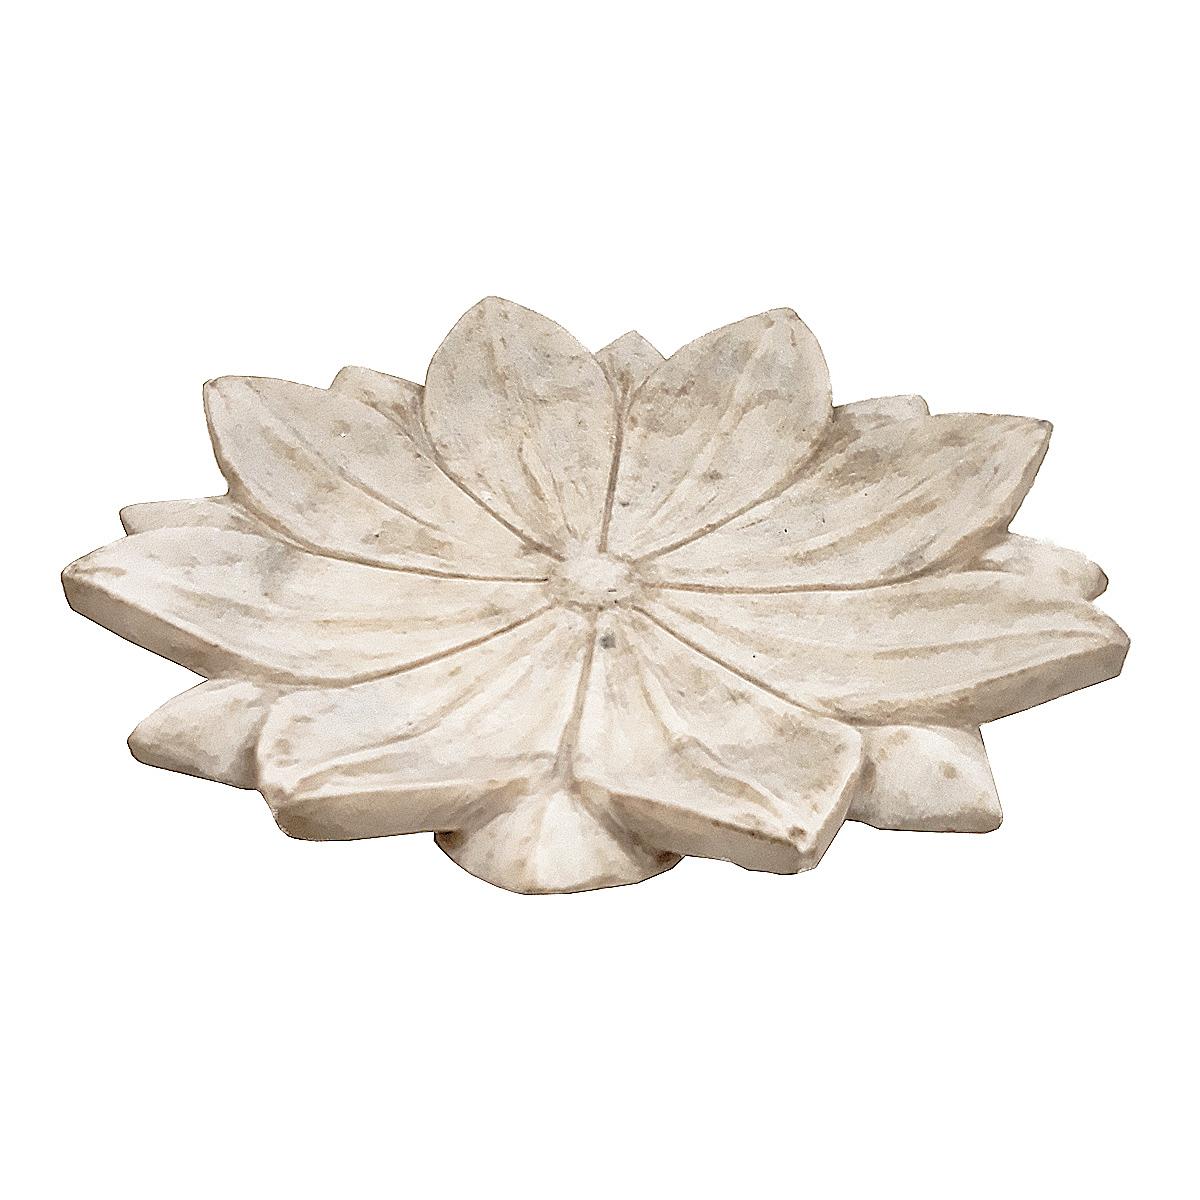 A small marble plate, bowl or vide-poche, hand-carved in India, mid-20th Century.
Shaped as a traditional Lotus flower, Its natural, unpolished finish gives it an attractive rustic appearance. 
Four pieces available. No two are exactly alike due to